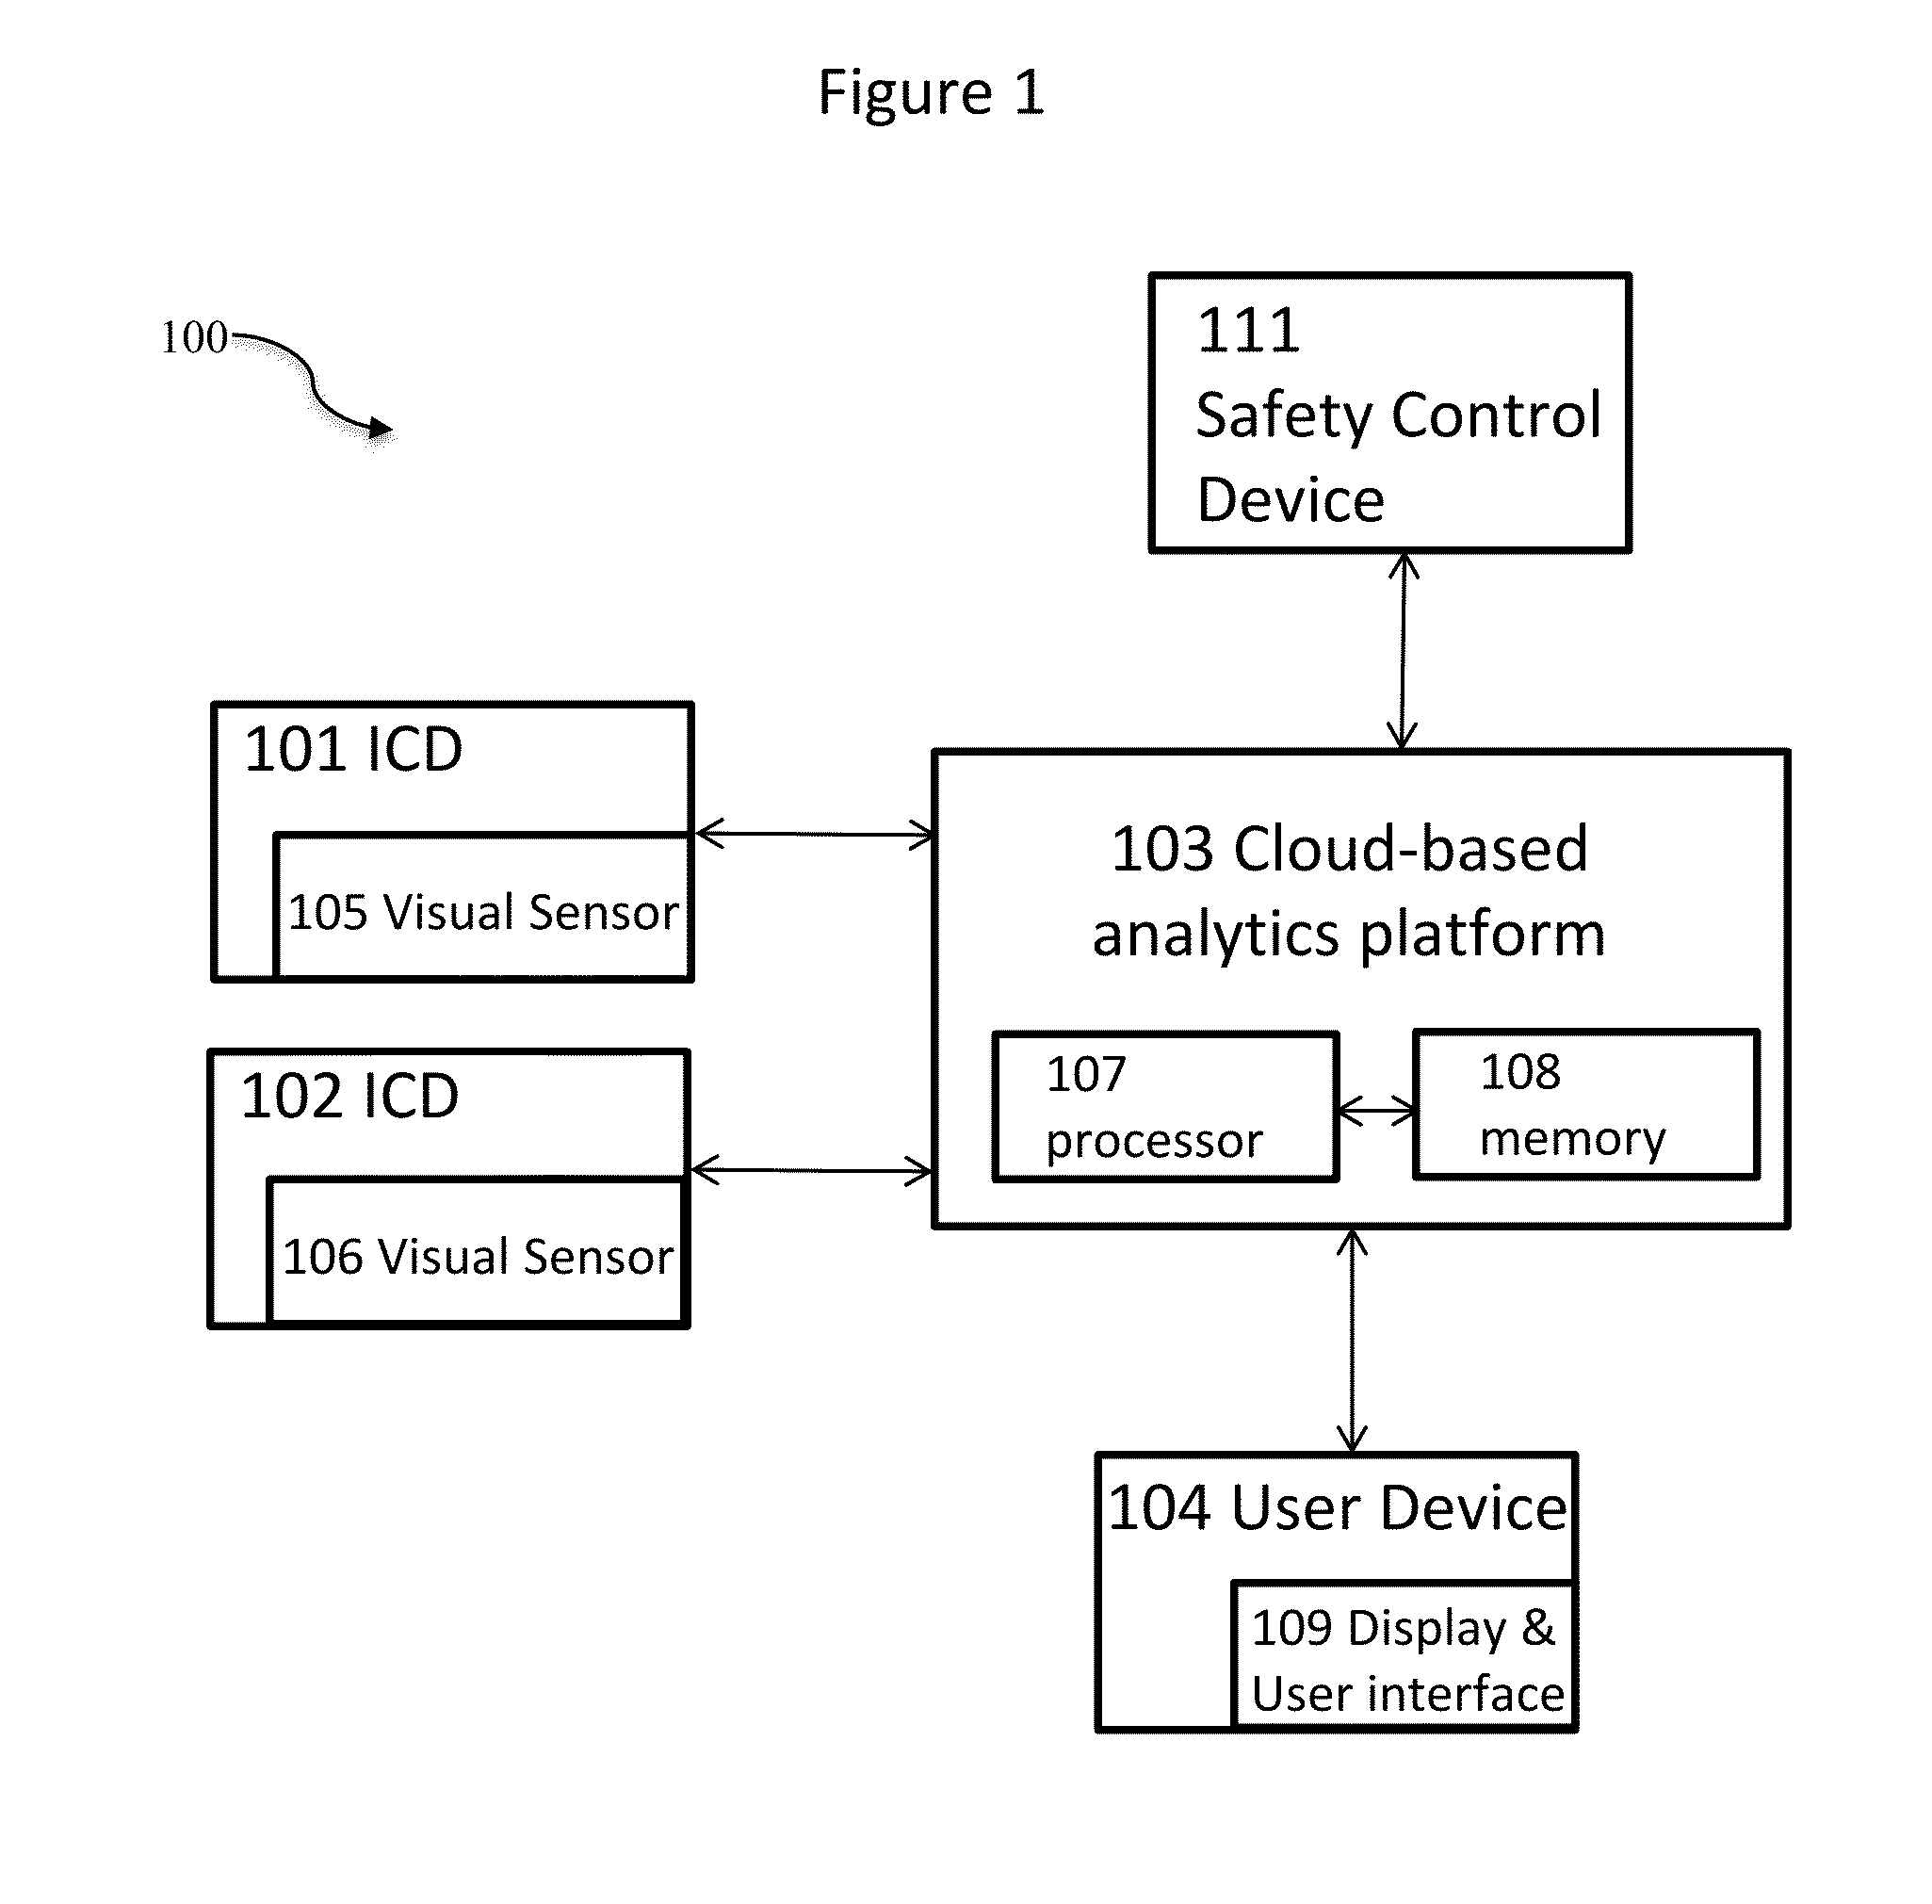 Systems and Methods for Automated 3-Dimensional (3D) Cloud-Based Analytics for Security Surveillance in Operation Areas